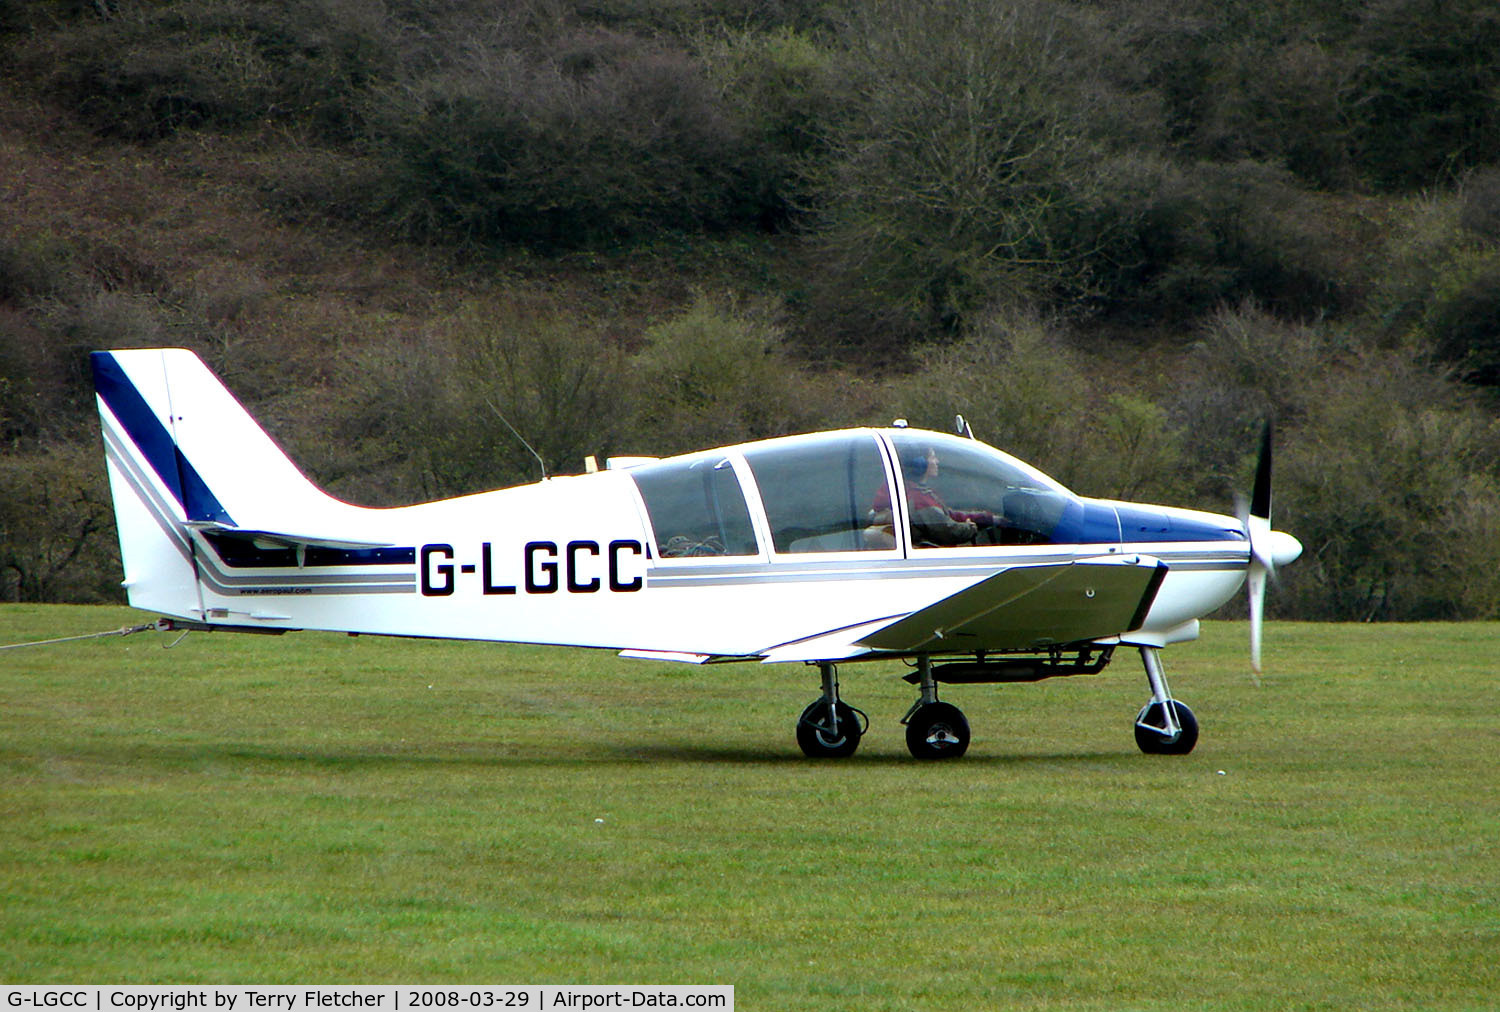 G-LGCC, 1975 Robin DR-400-180R Remorqueur Regent C/N 1021, Tug for the Gliders at Dunstable Downs